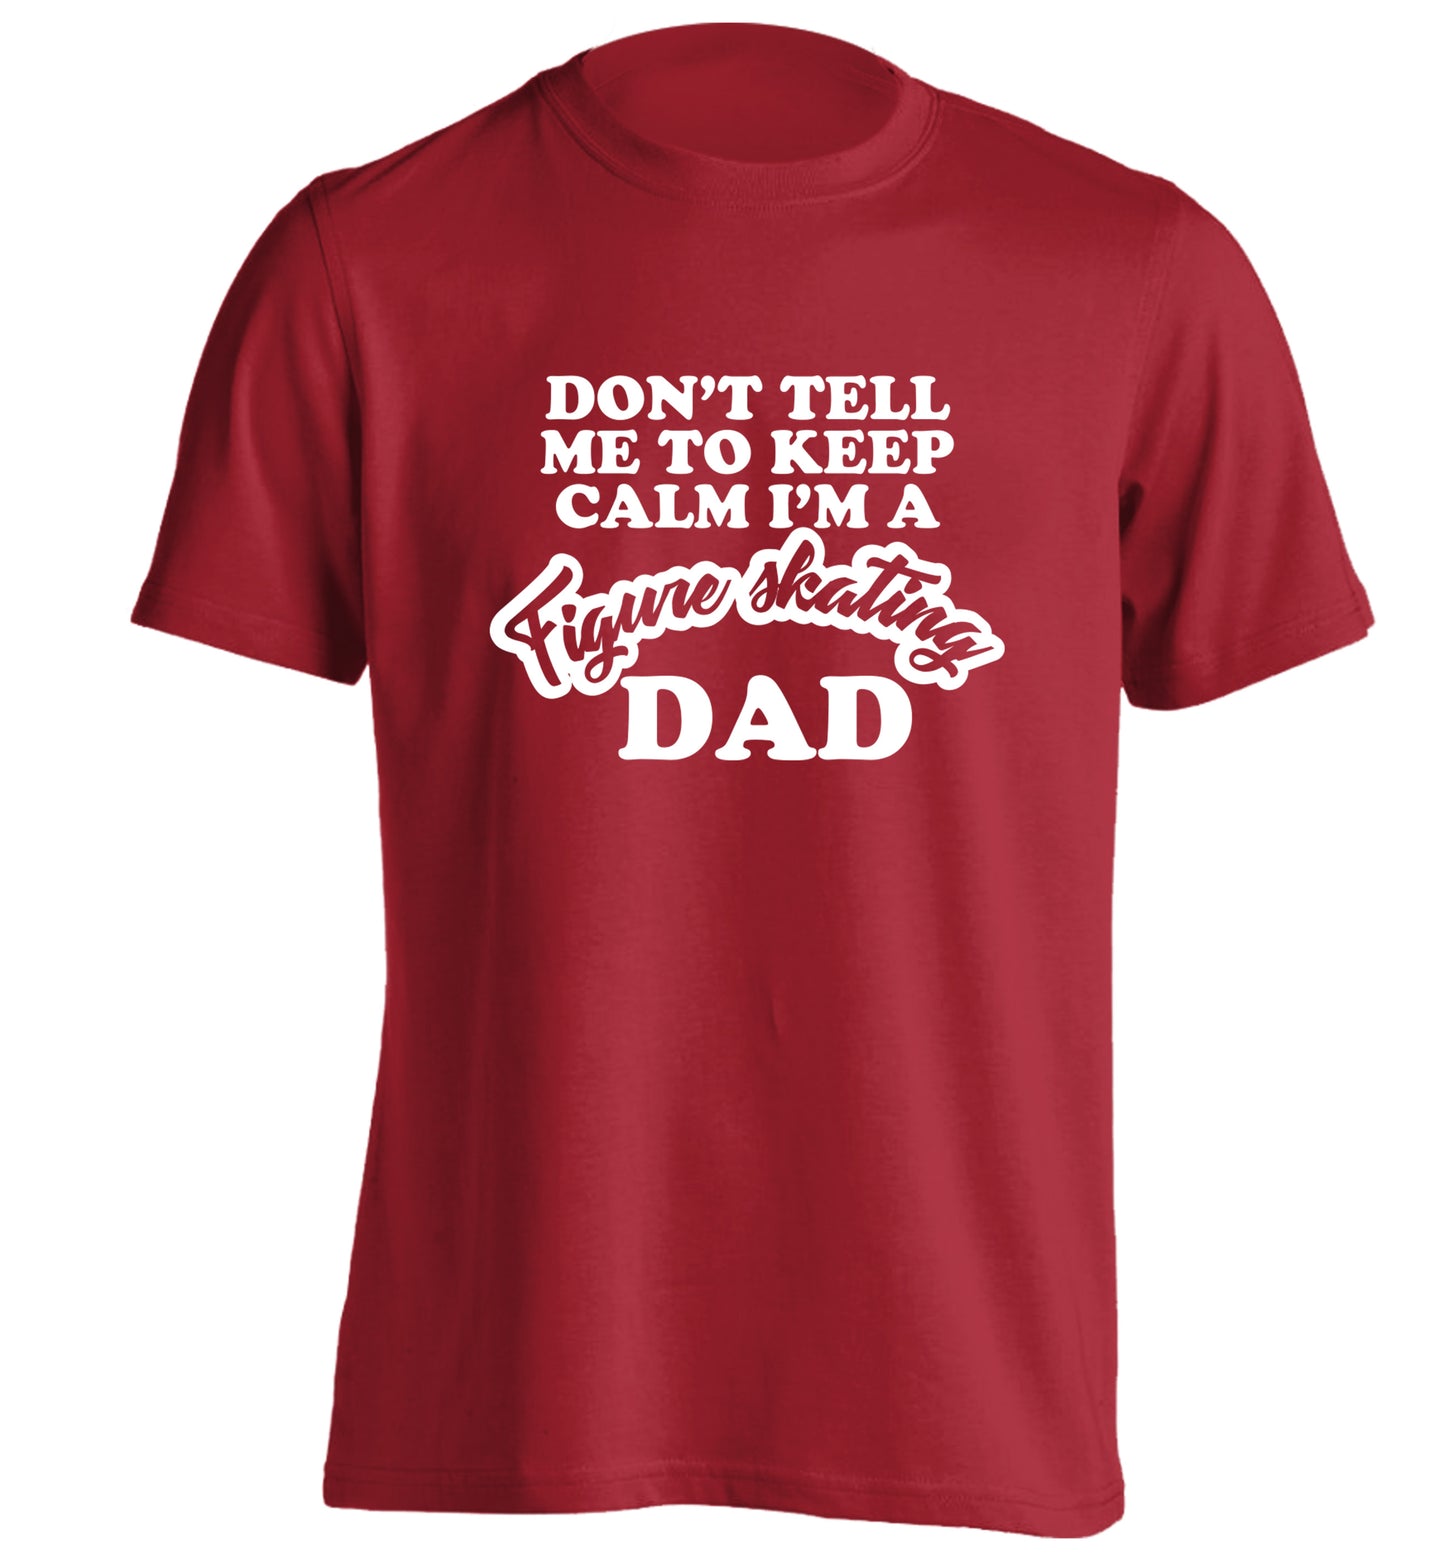 Don't tell me to keep calm I'm a figure skating dad adults unisexred Tshirt 2XL